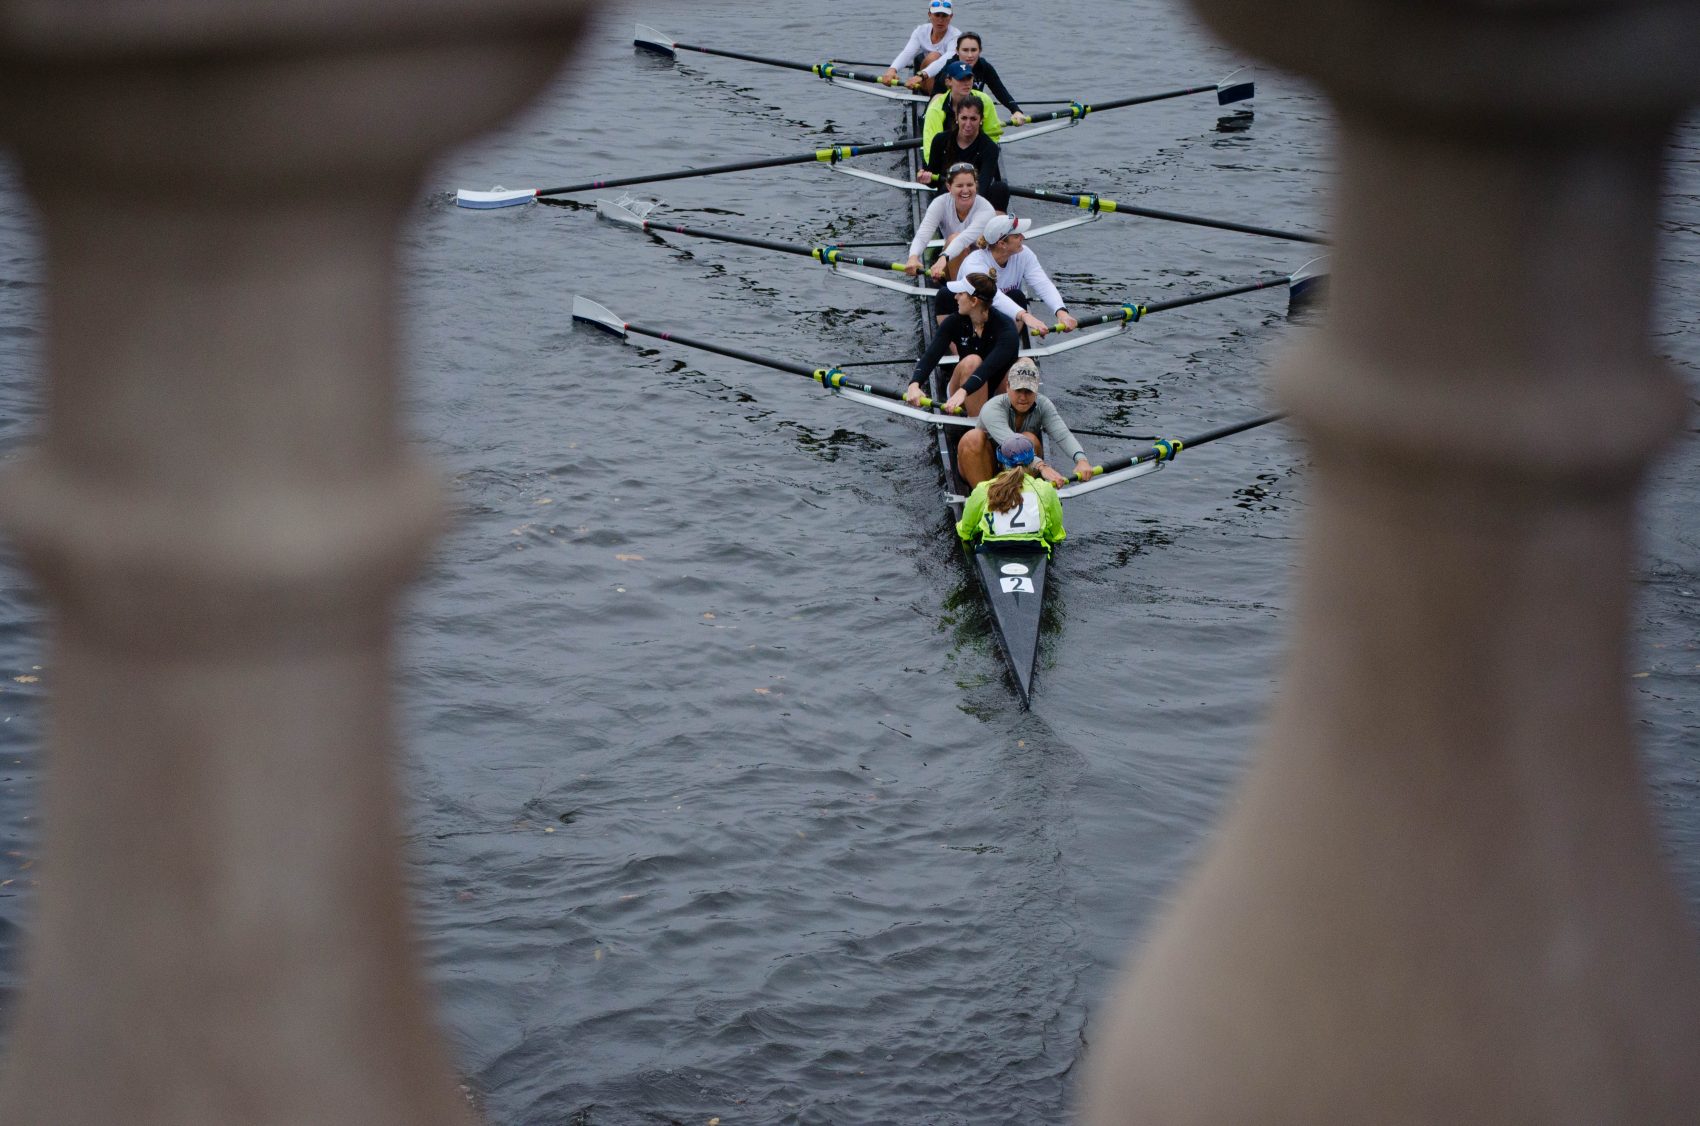 Boats pass under the Weeks Footbridge on their way to the starting line for the Head of the Charles. (Elizabeth Gillis/WBUR)